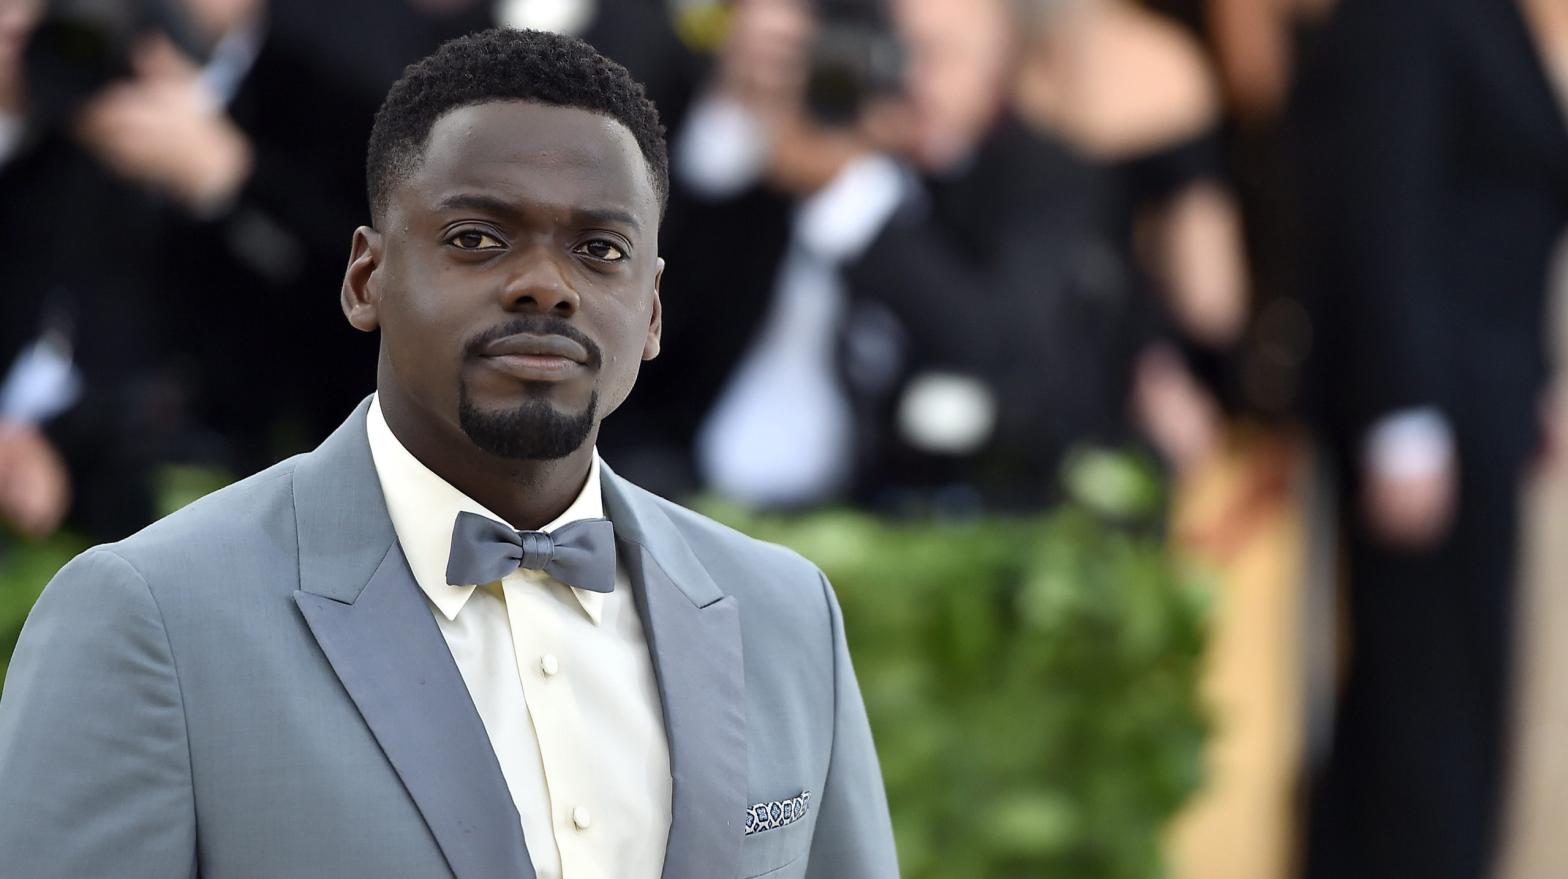 Daniel Kaluuya attends the Costume Institute Gala at the Metropolitan Museum of Art on May 7, 2018 in New York City. (Photo: Theo Wargo/Getty Images for Huffington Post, Getty Images)